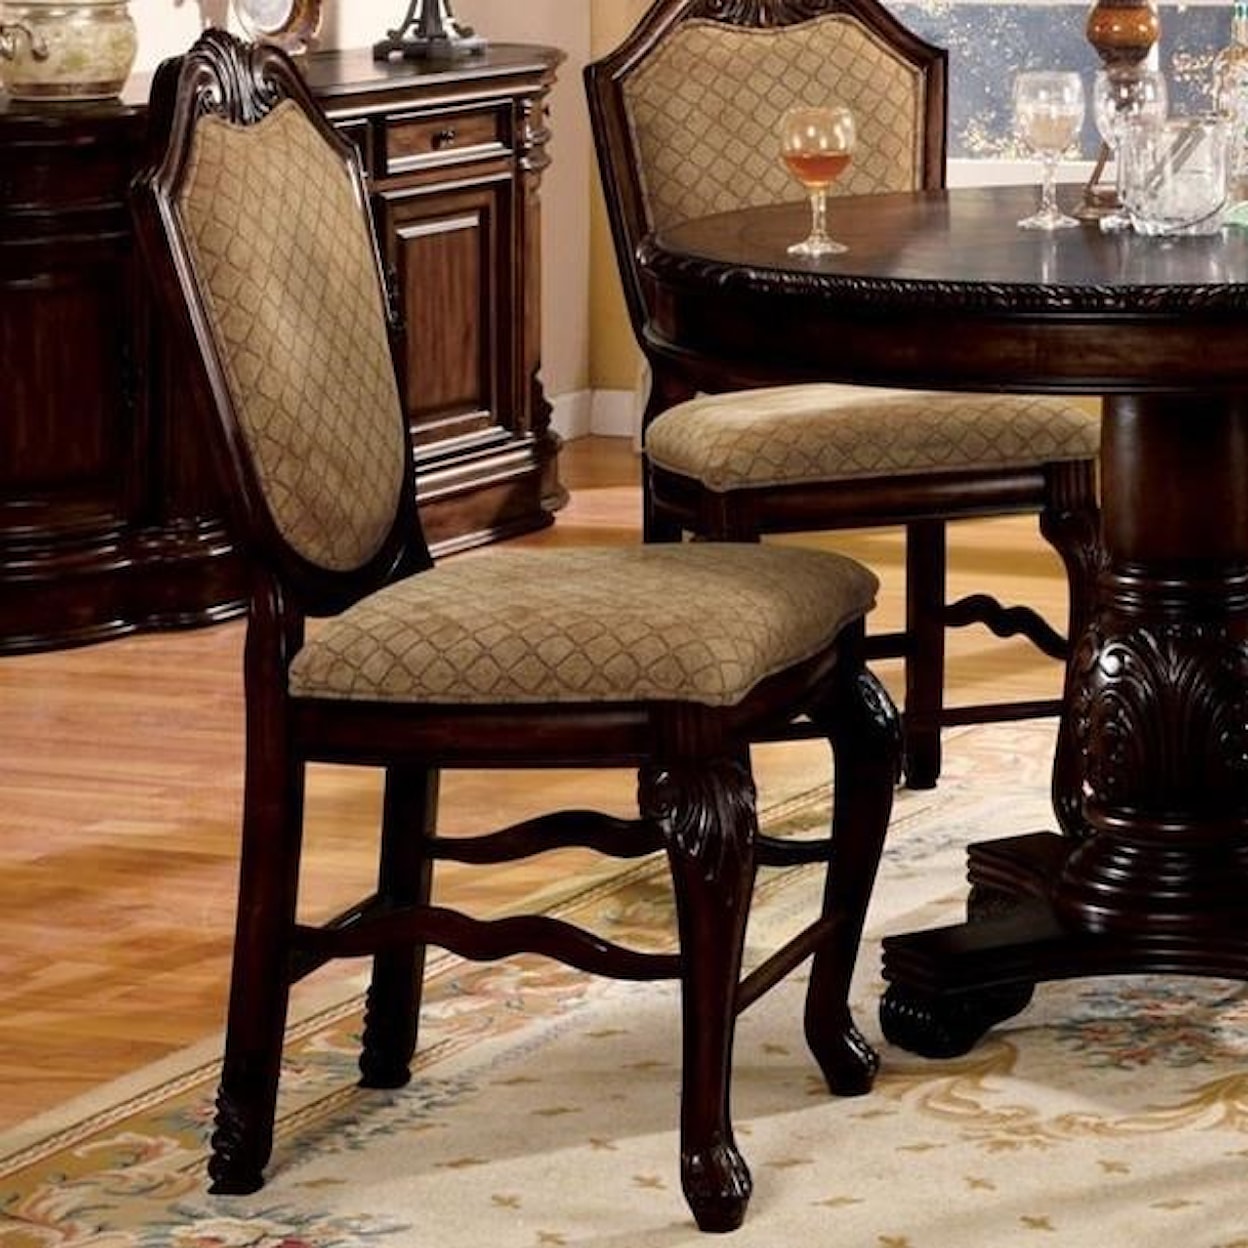 Acme Furniture Chateau De Ville Counter Height Dining Chair